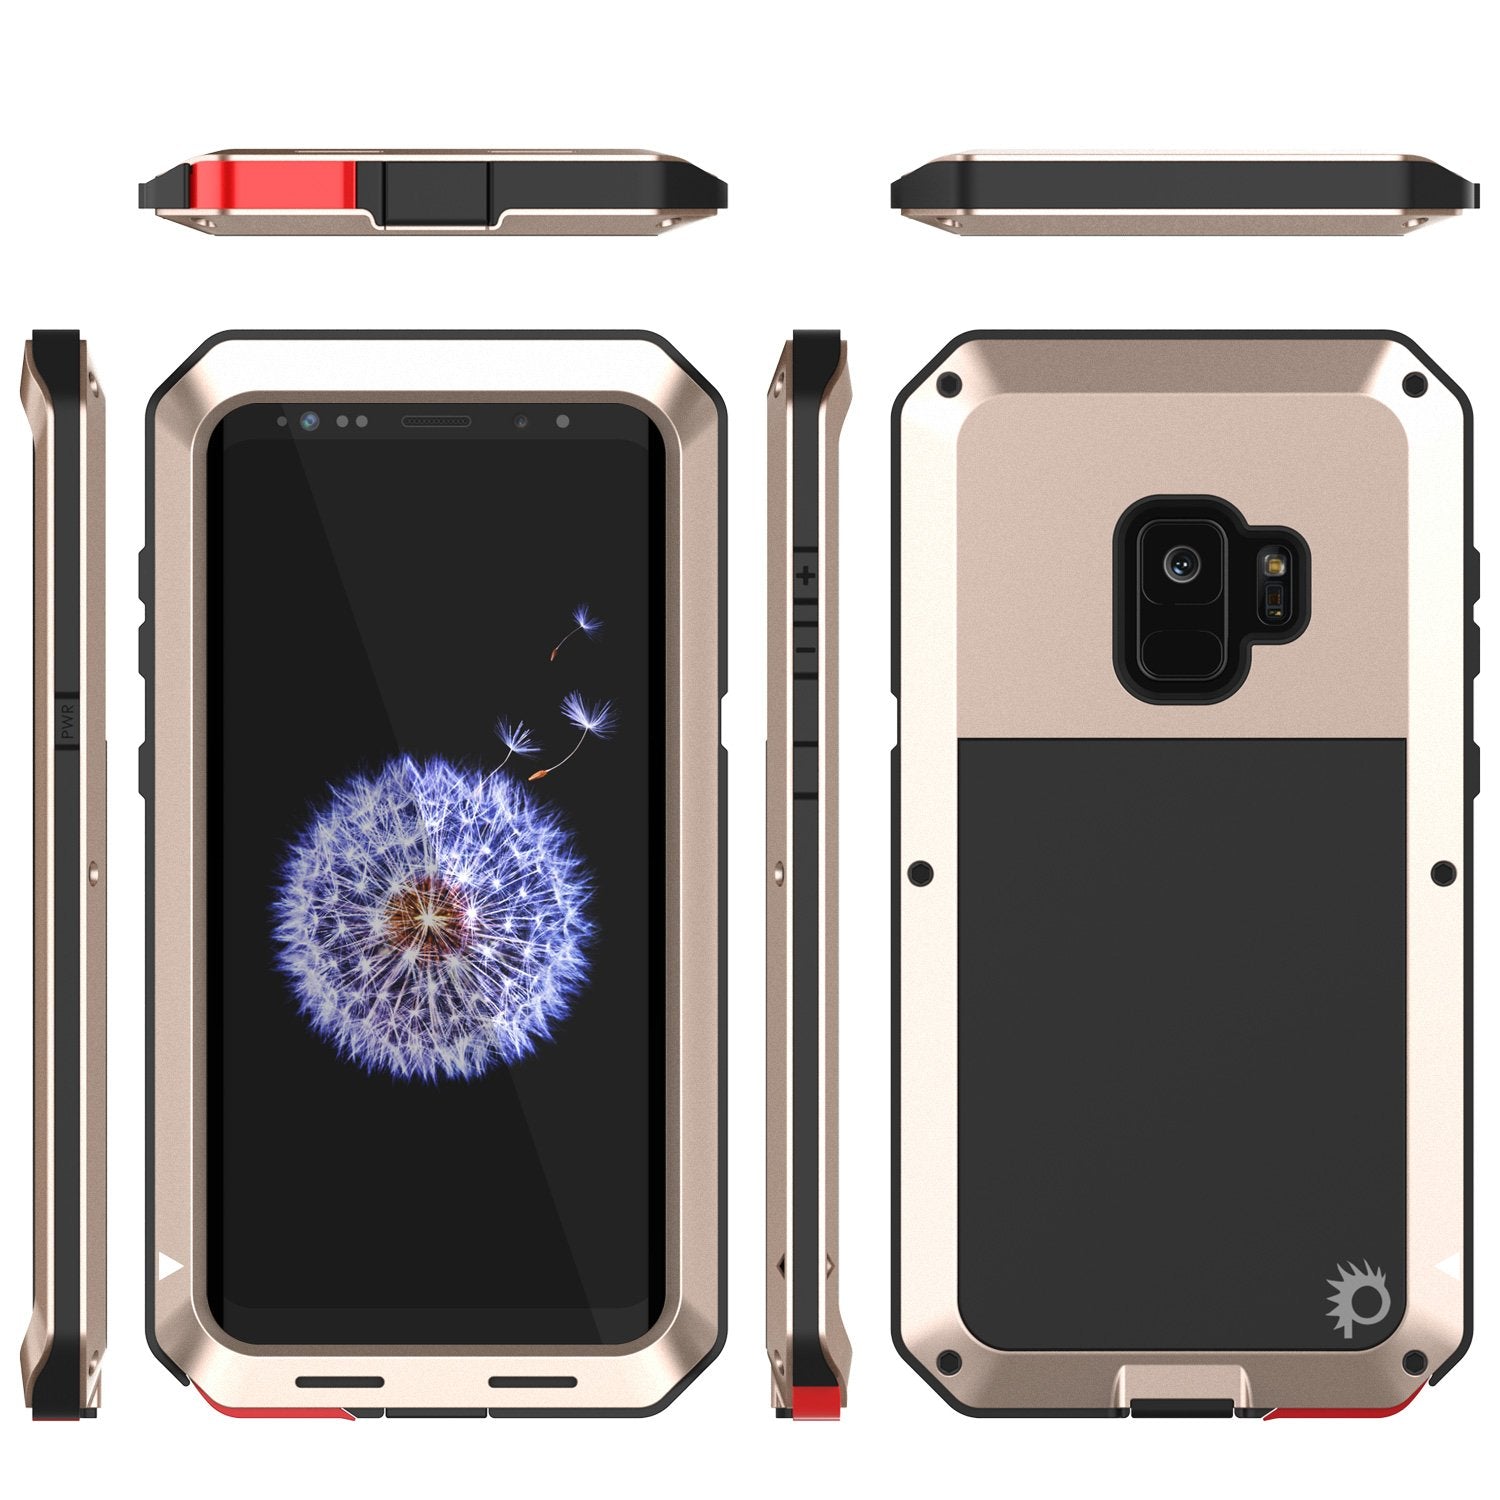 Galaxy S9 Metal Case, Heavy Duty Military Grade Rugged Armor Cover [shock proof] Hybrid Full Body Hard Aluminum & TPU Design [non slip] W/ Prime Drop Protection for Samsung Galaxy S9 [Gold] - PunkCase NZ